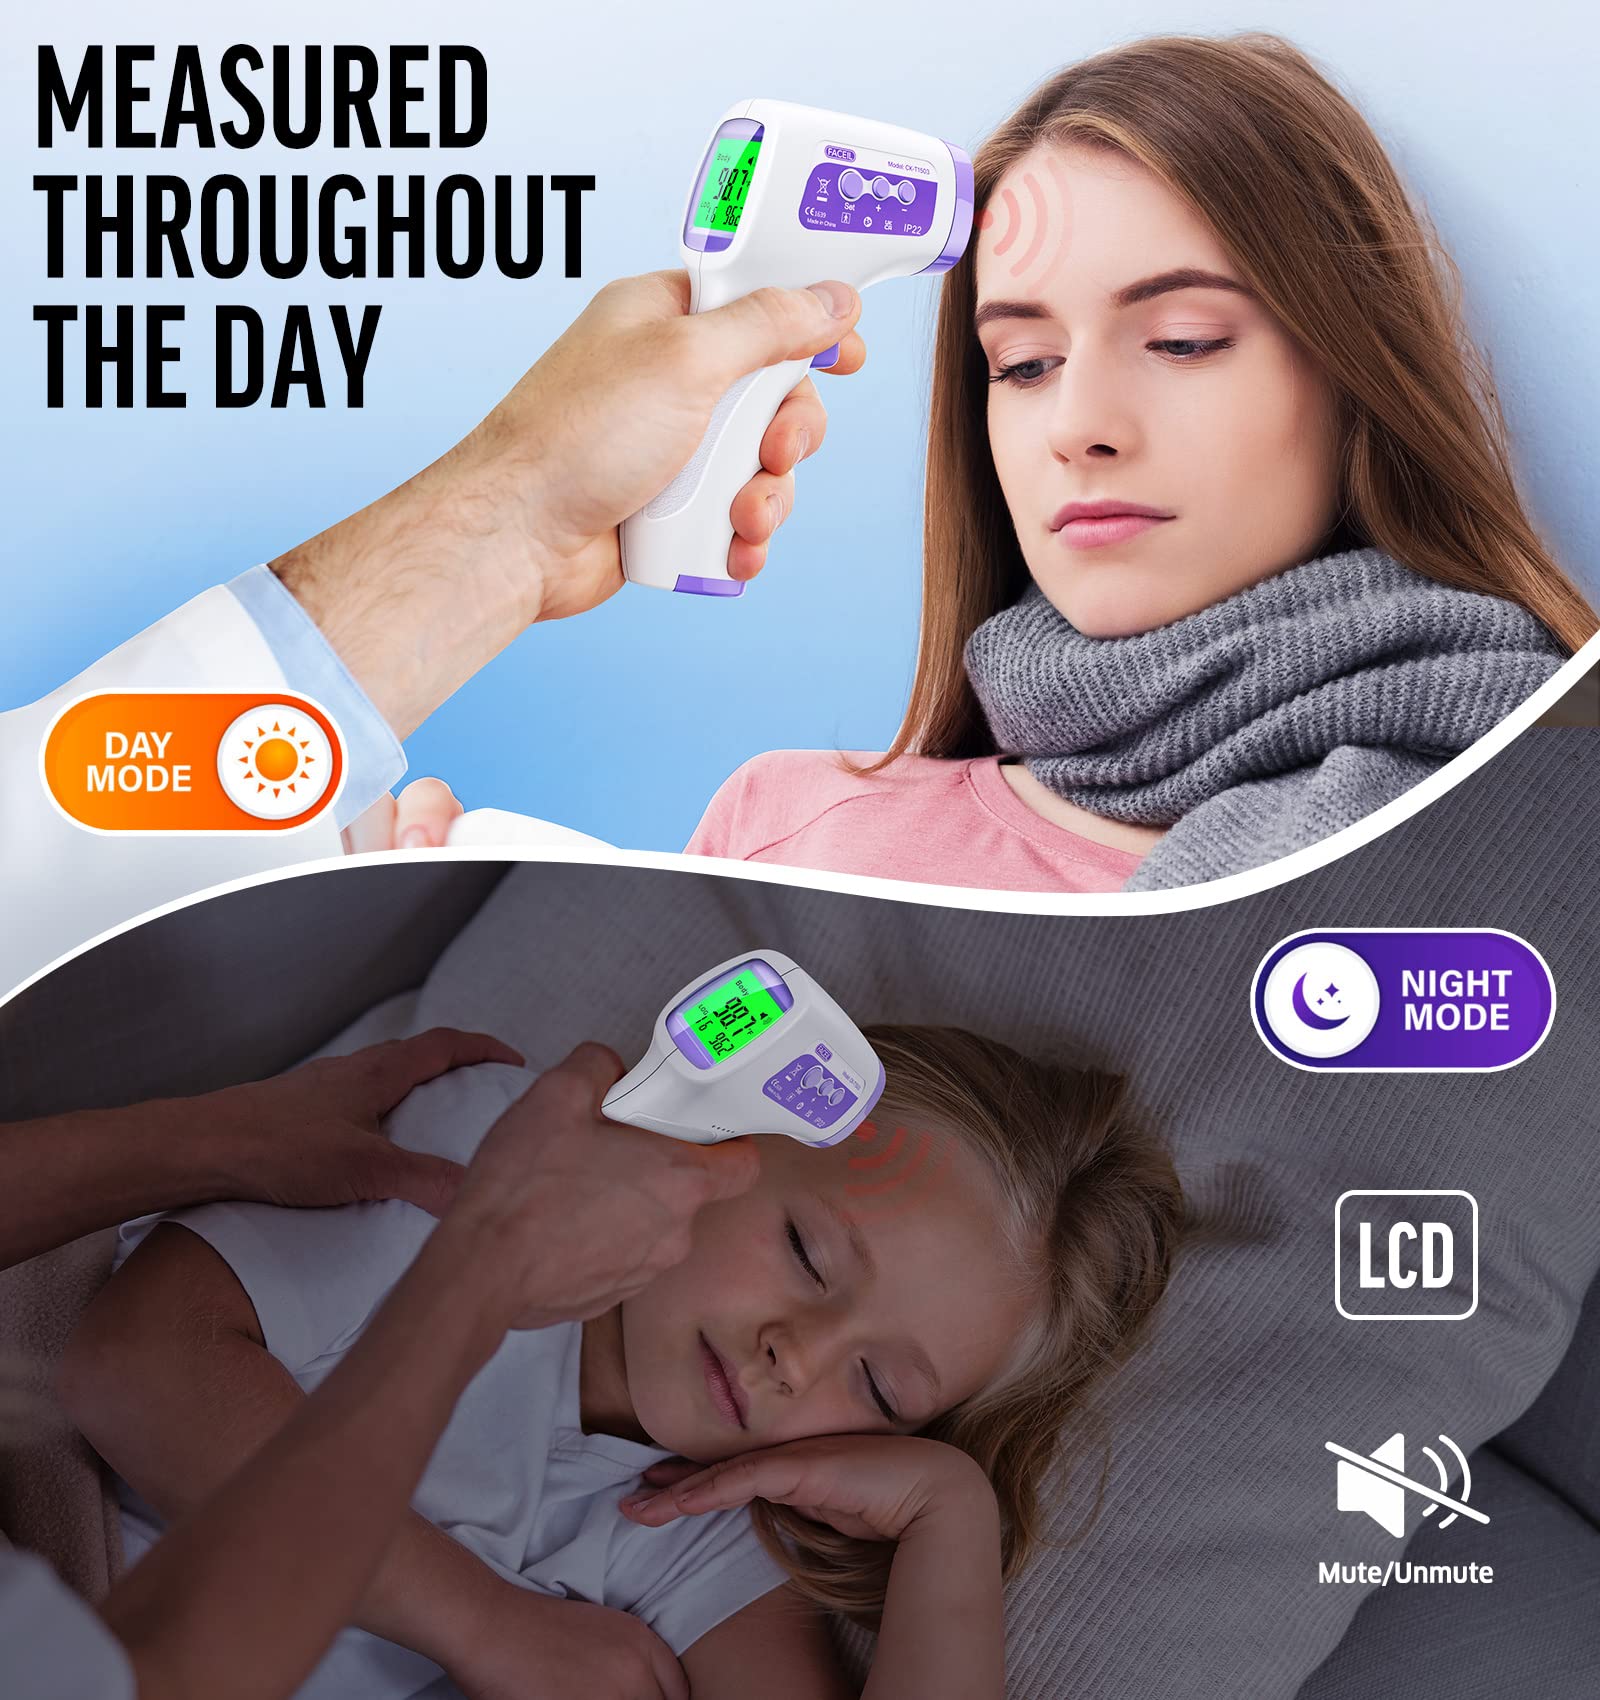 Thermometer for Adults Forehead,Touchless Thermometer for Fever,Digital Infrared Thermometer with Fever Alarm, C/F Switchable, 32 Set Memories Instant Reading Baby Thermometer for Adults and Kids